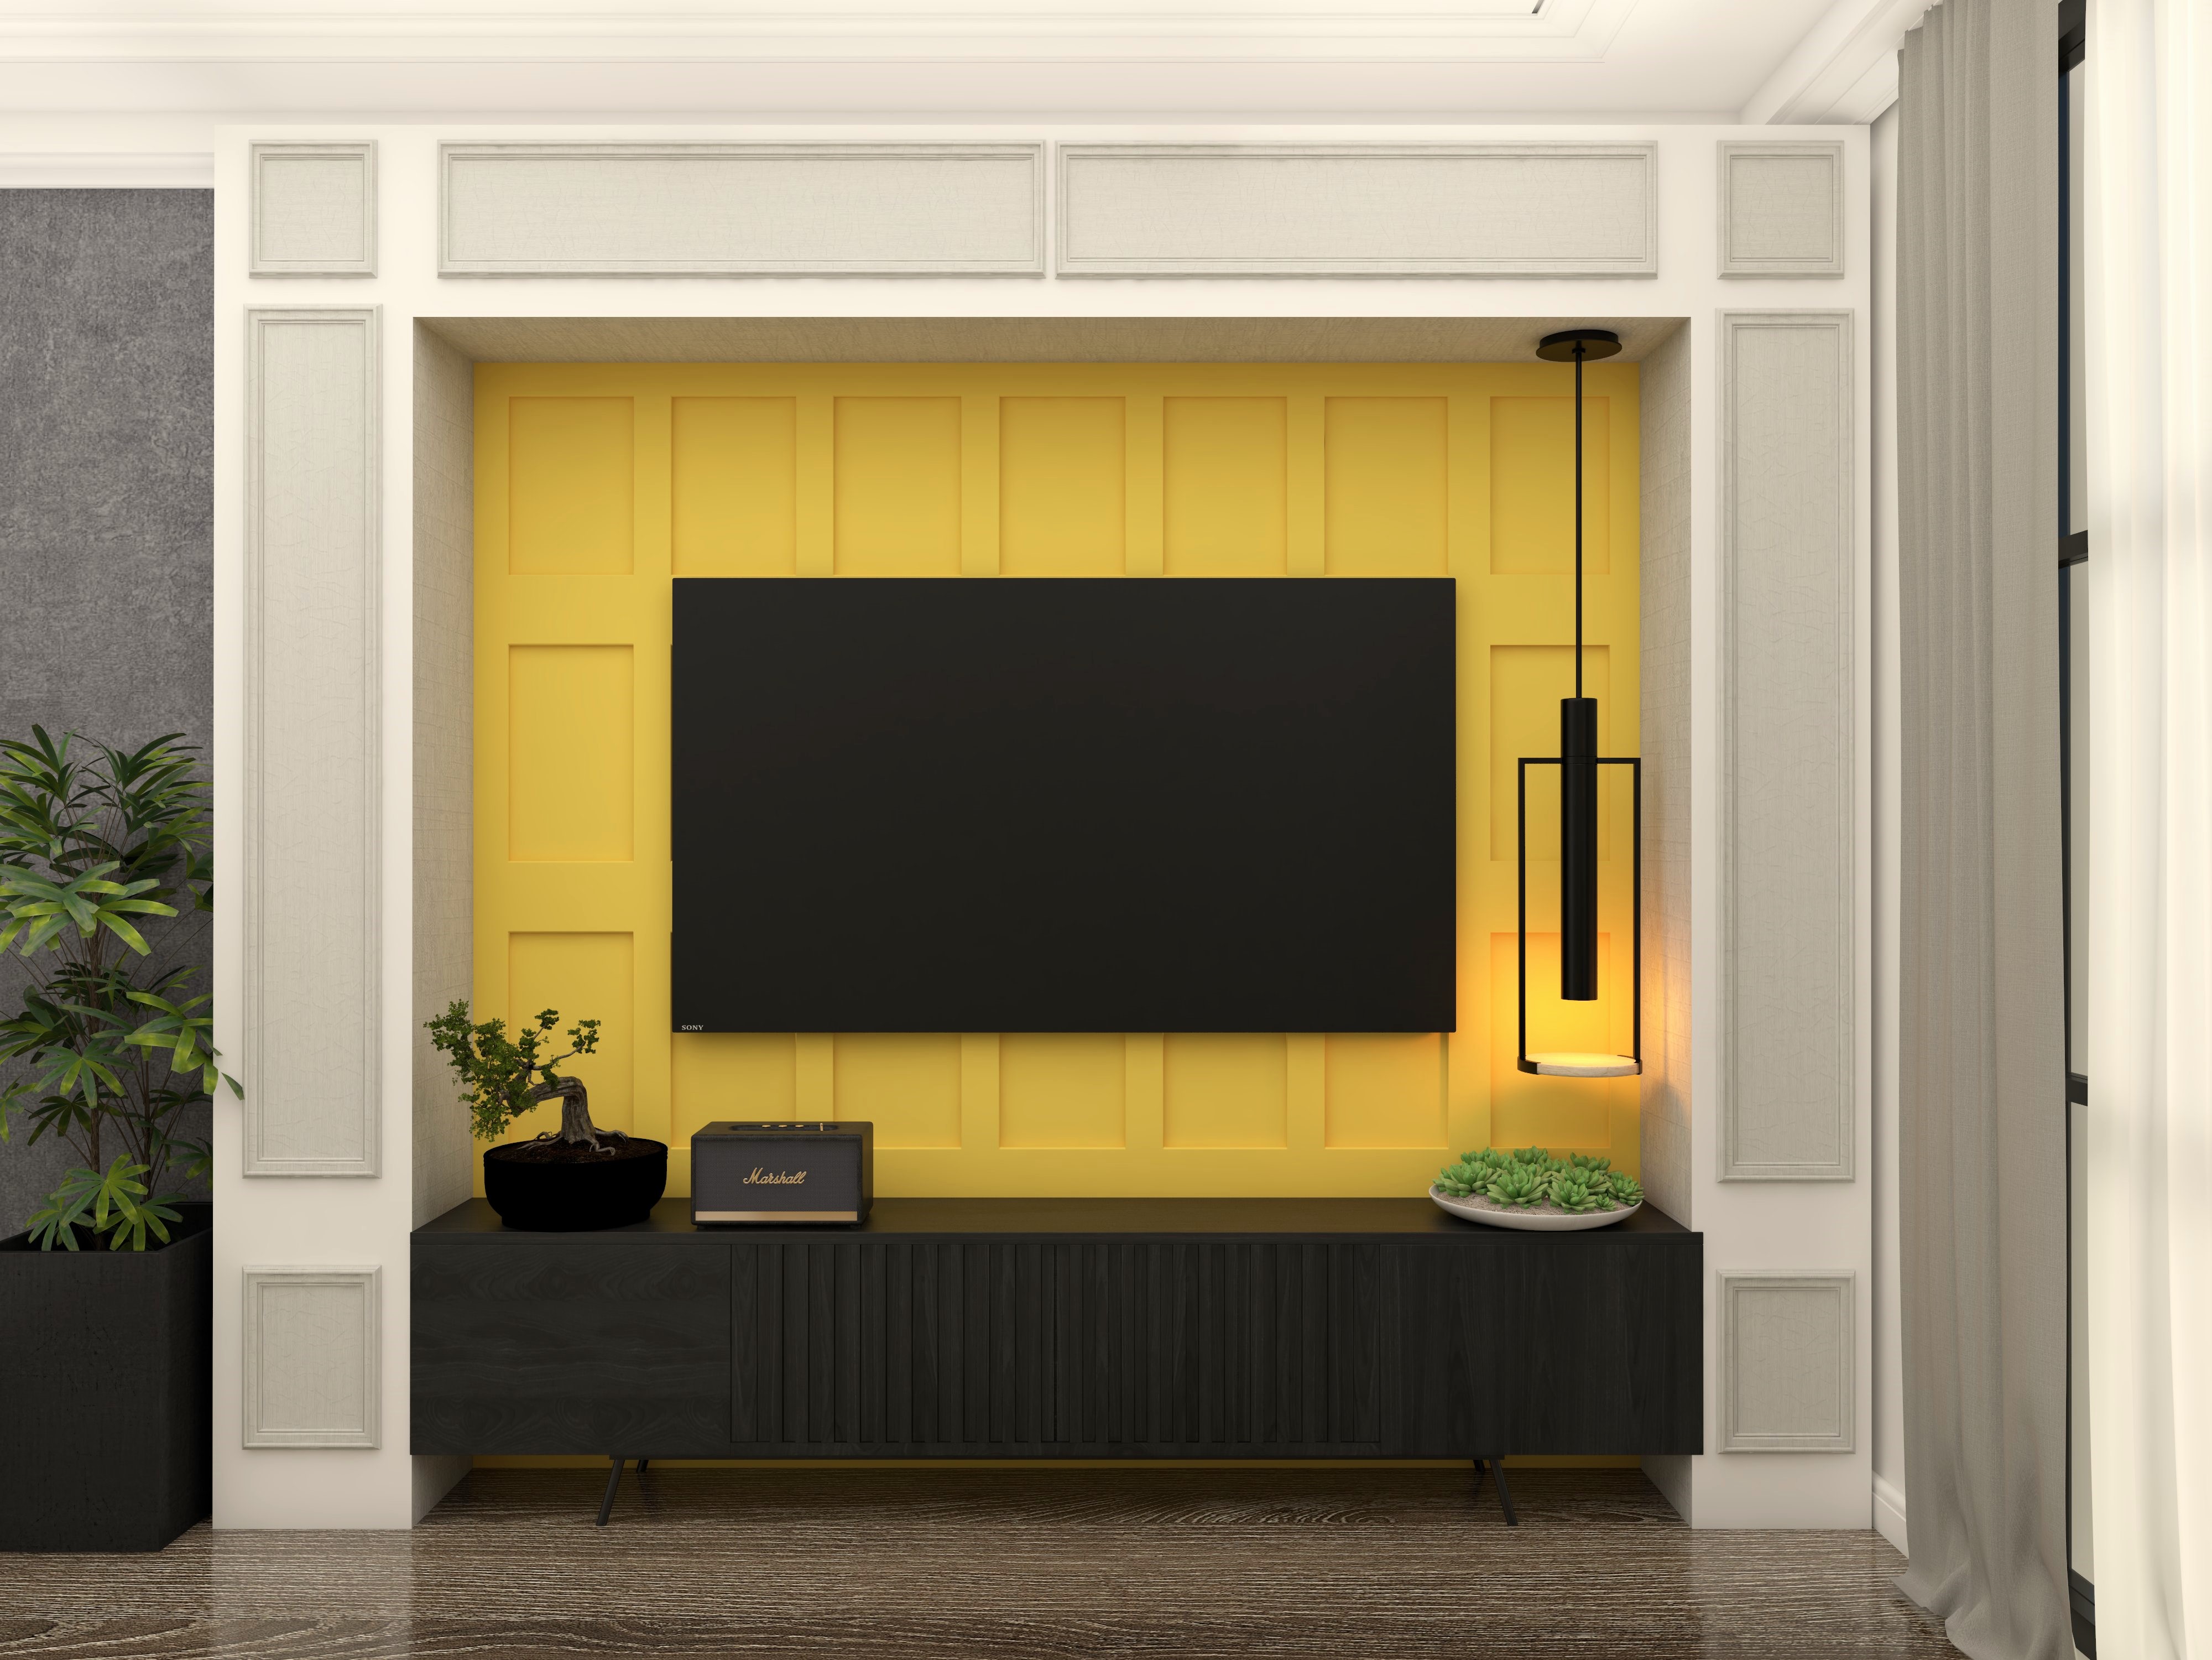 TV unit with yellow wall paneling and black fluted console unit-Beautiful Homes